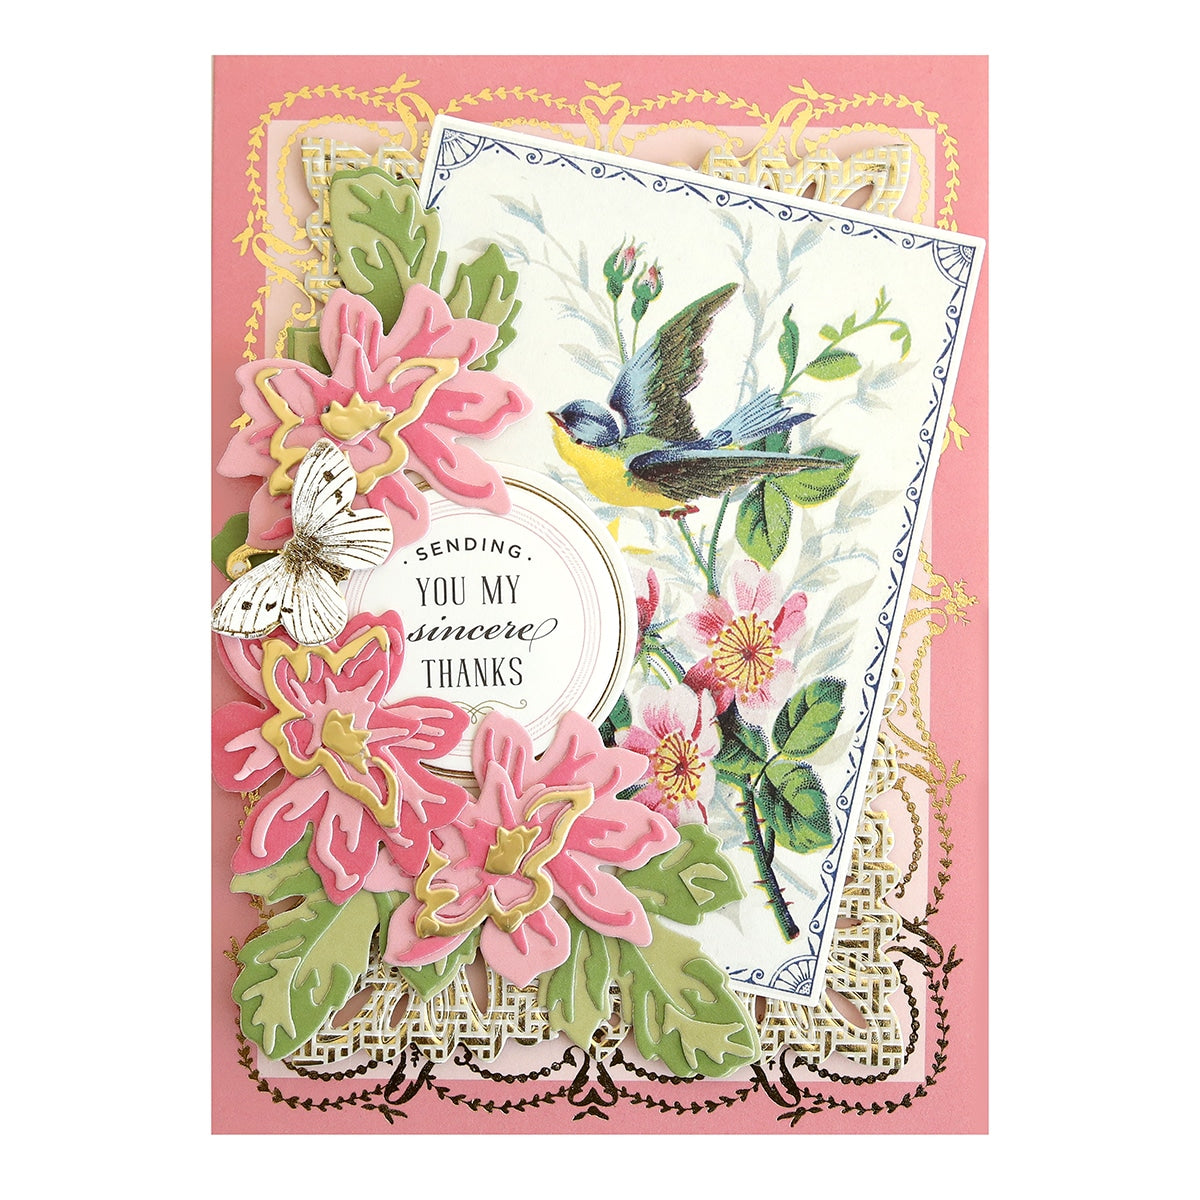 a card with a bird and flowers on it.